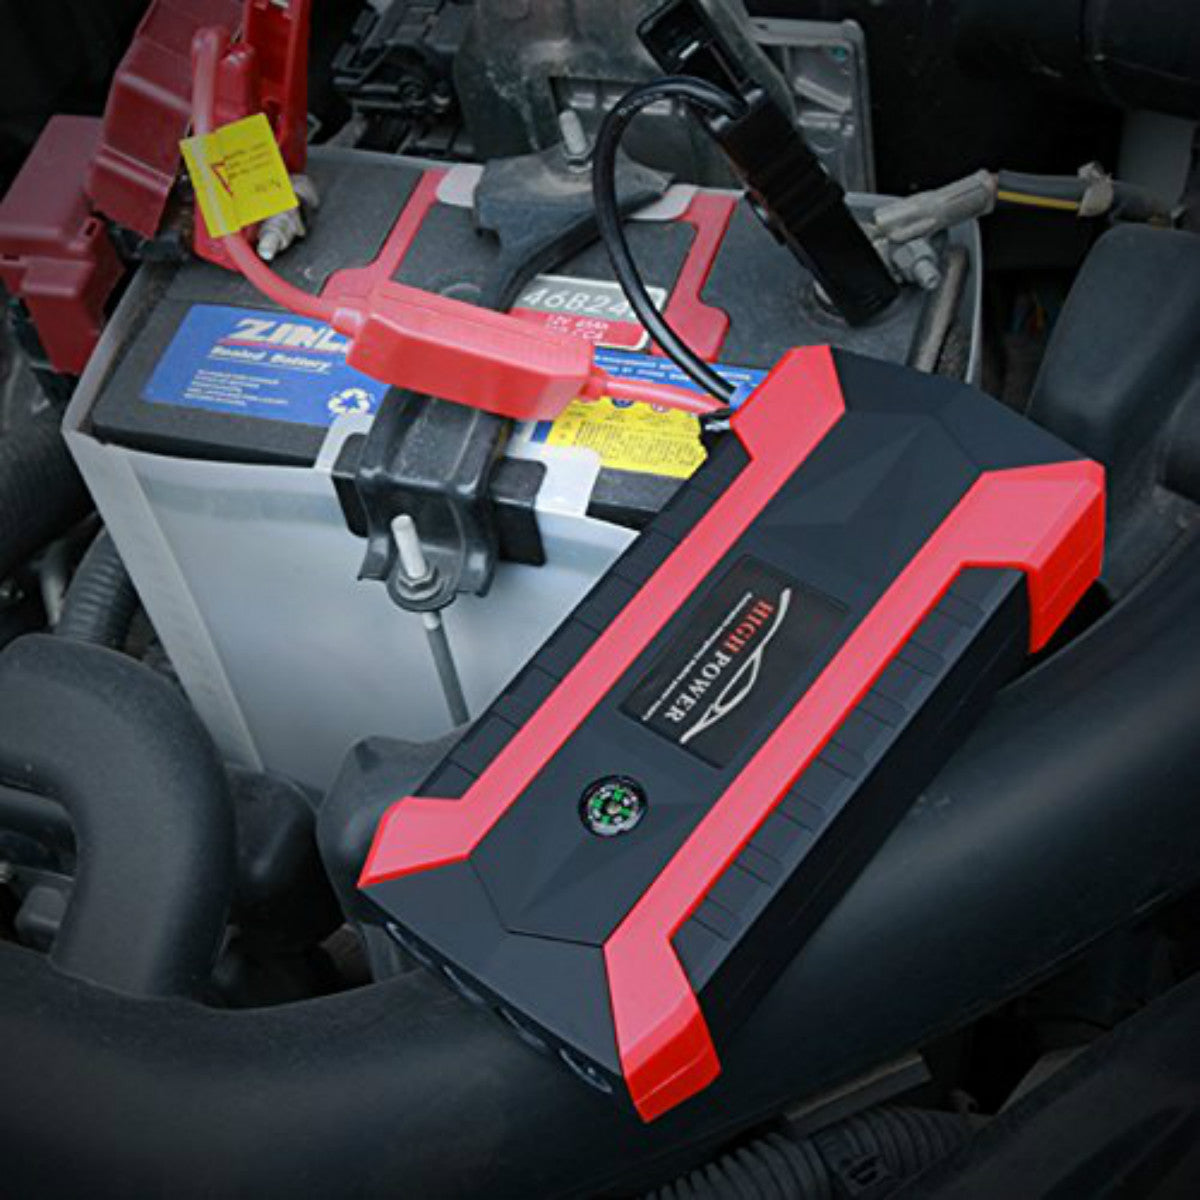 JX29 Portable Car Jump Starter 89800mAh 600A Peak 12V Emergency Battery Booster with LED Flashlight Compass - Auto GoShop